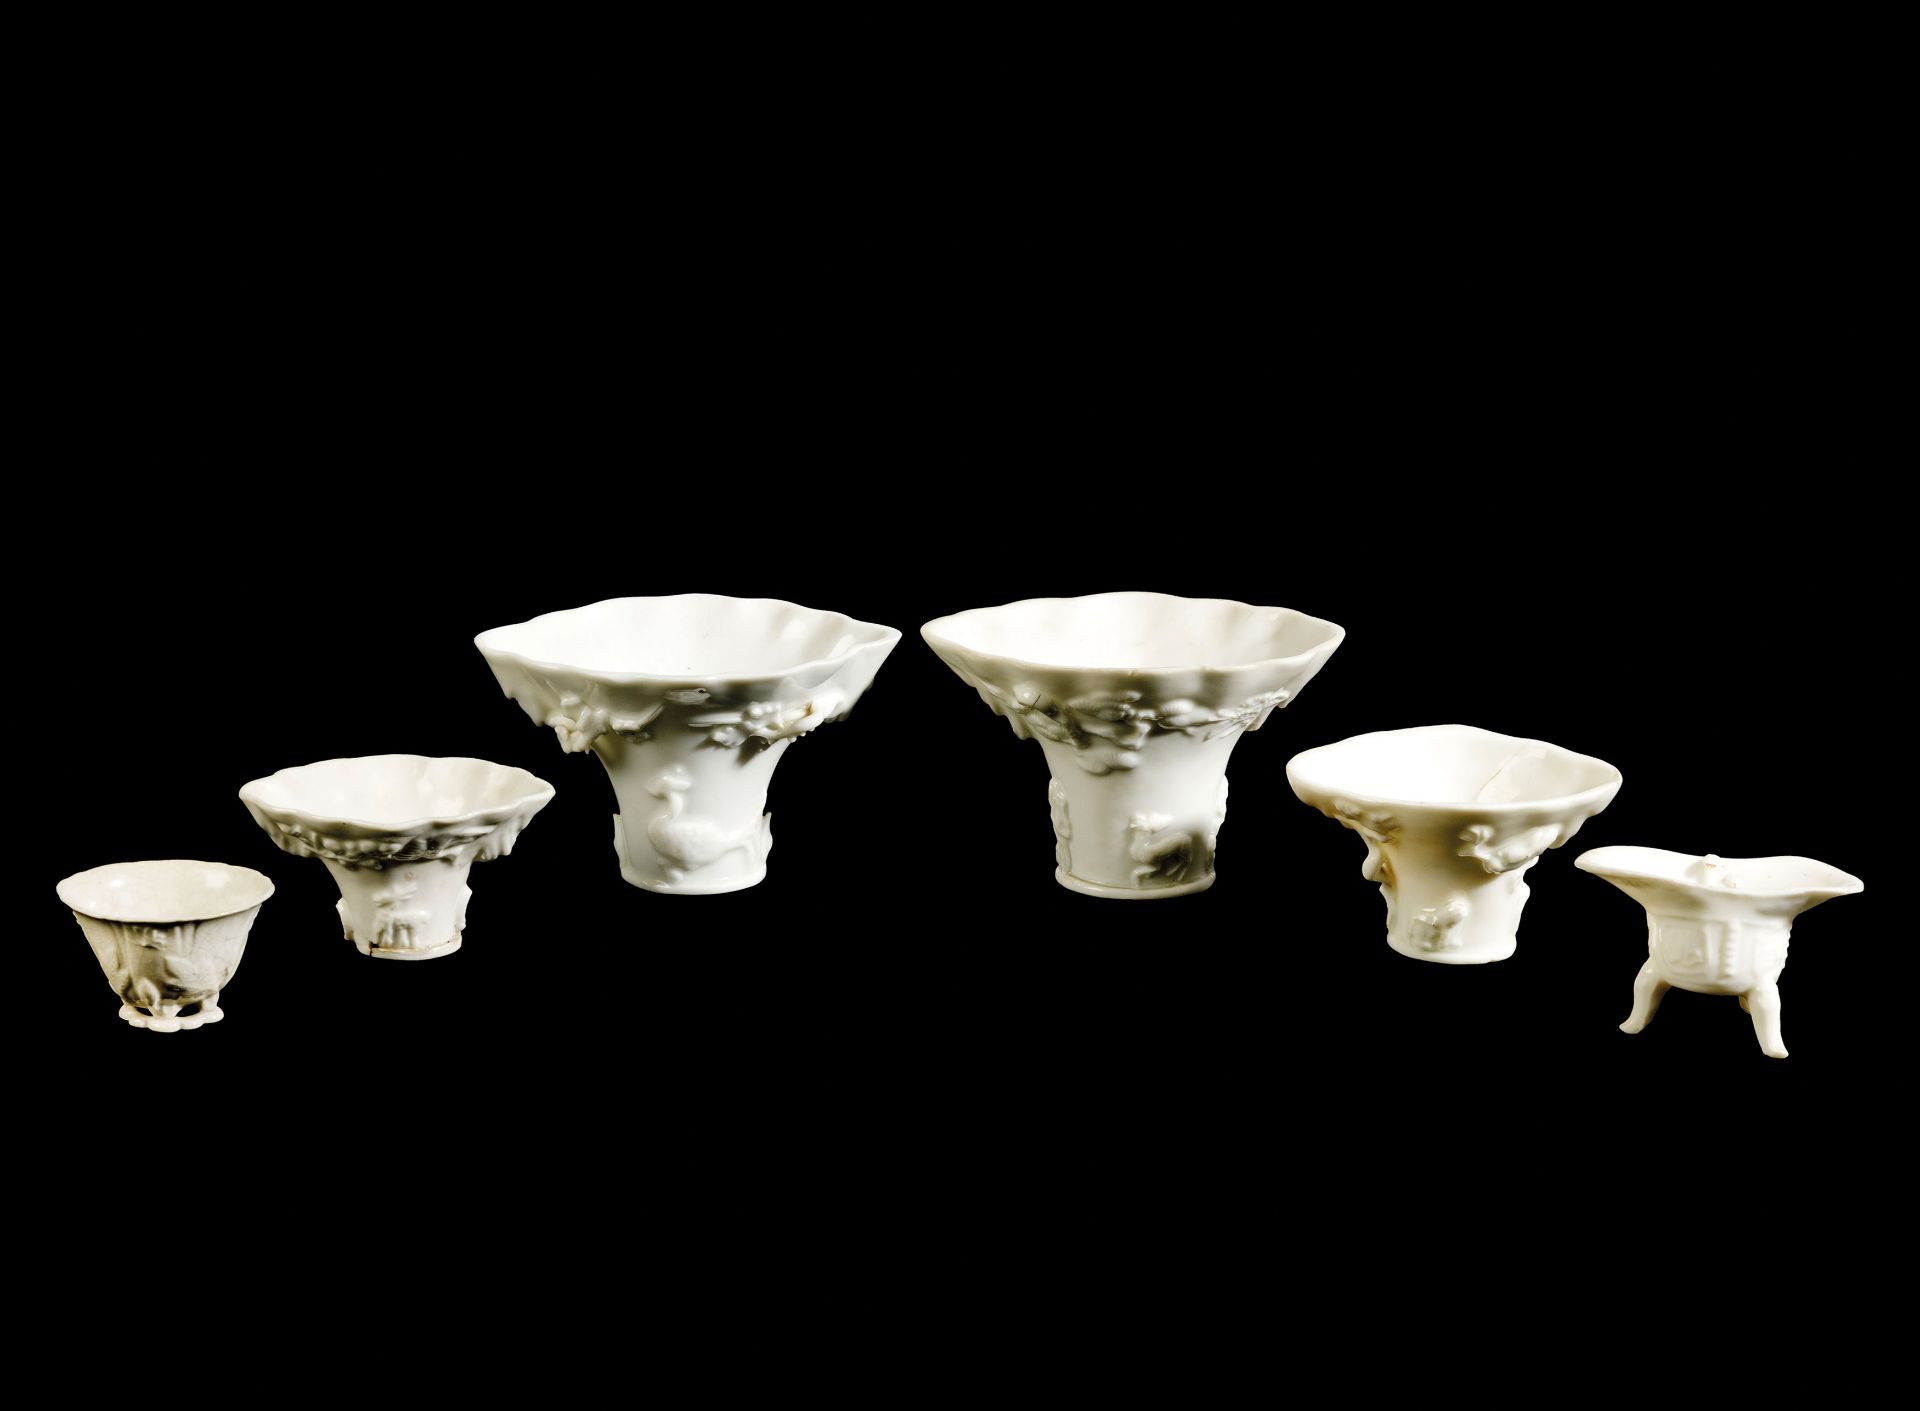 SIX BLANC-DE-CHINE PORCELAIN LIBAGION CUPS VARIOUSLY SIZED, CHINA,17TH -18TH CENTURY (6)